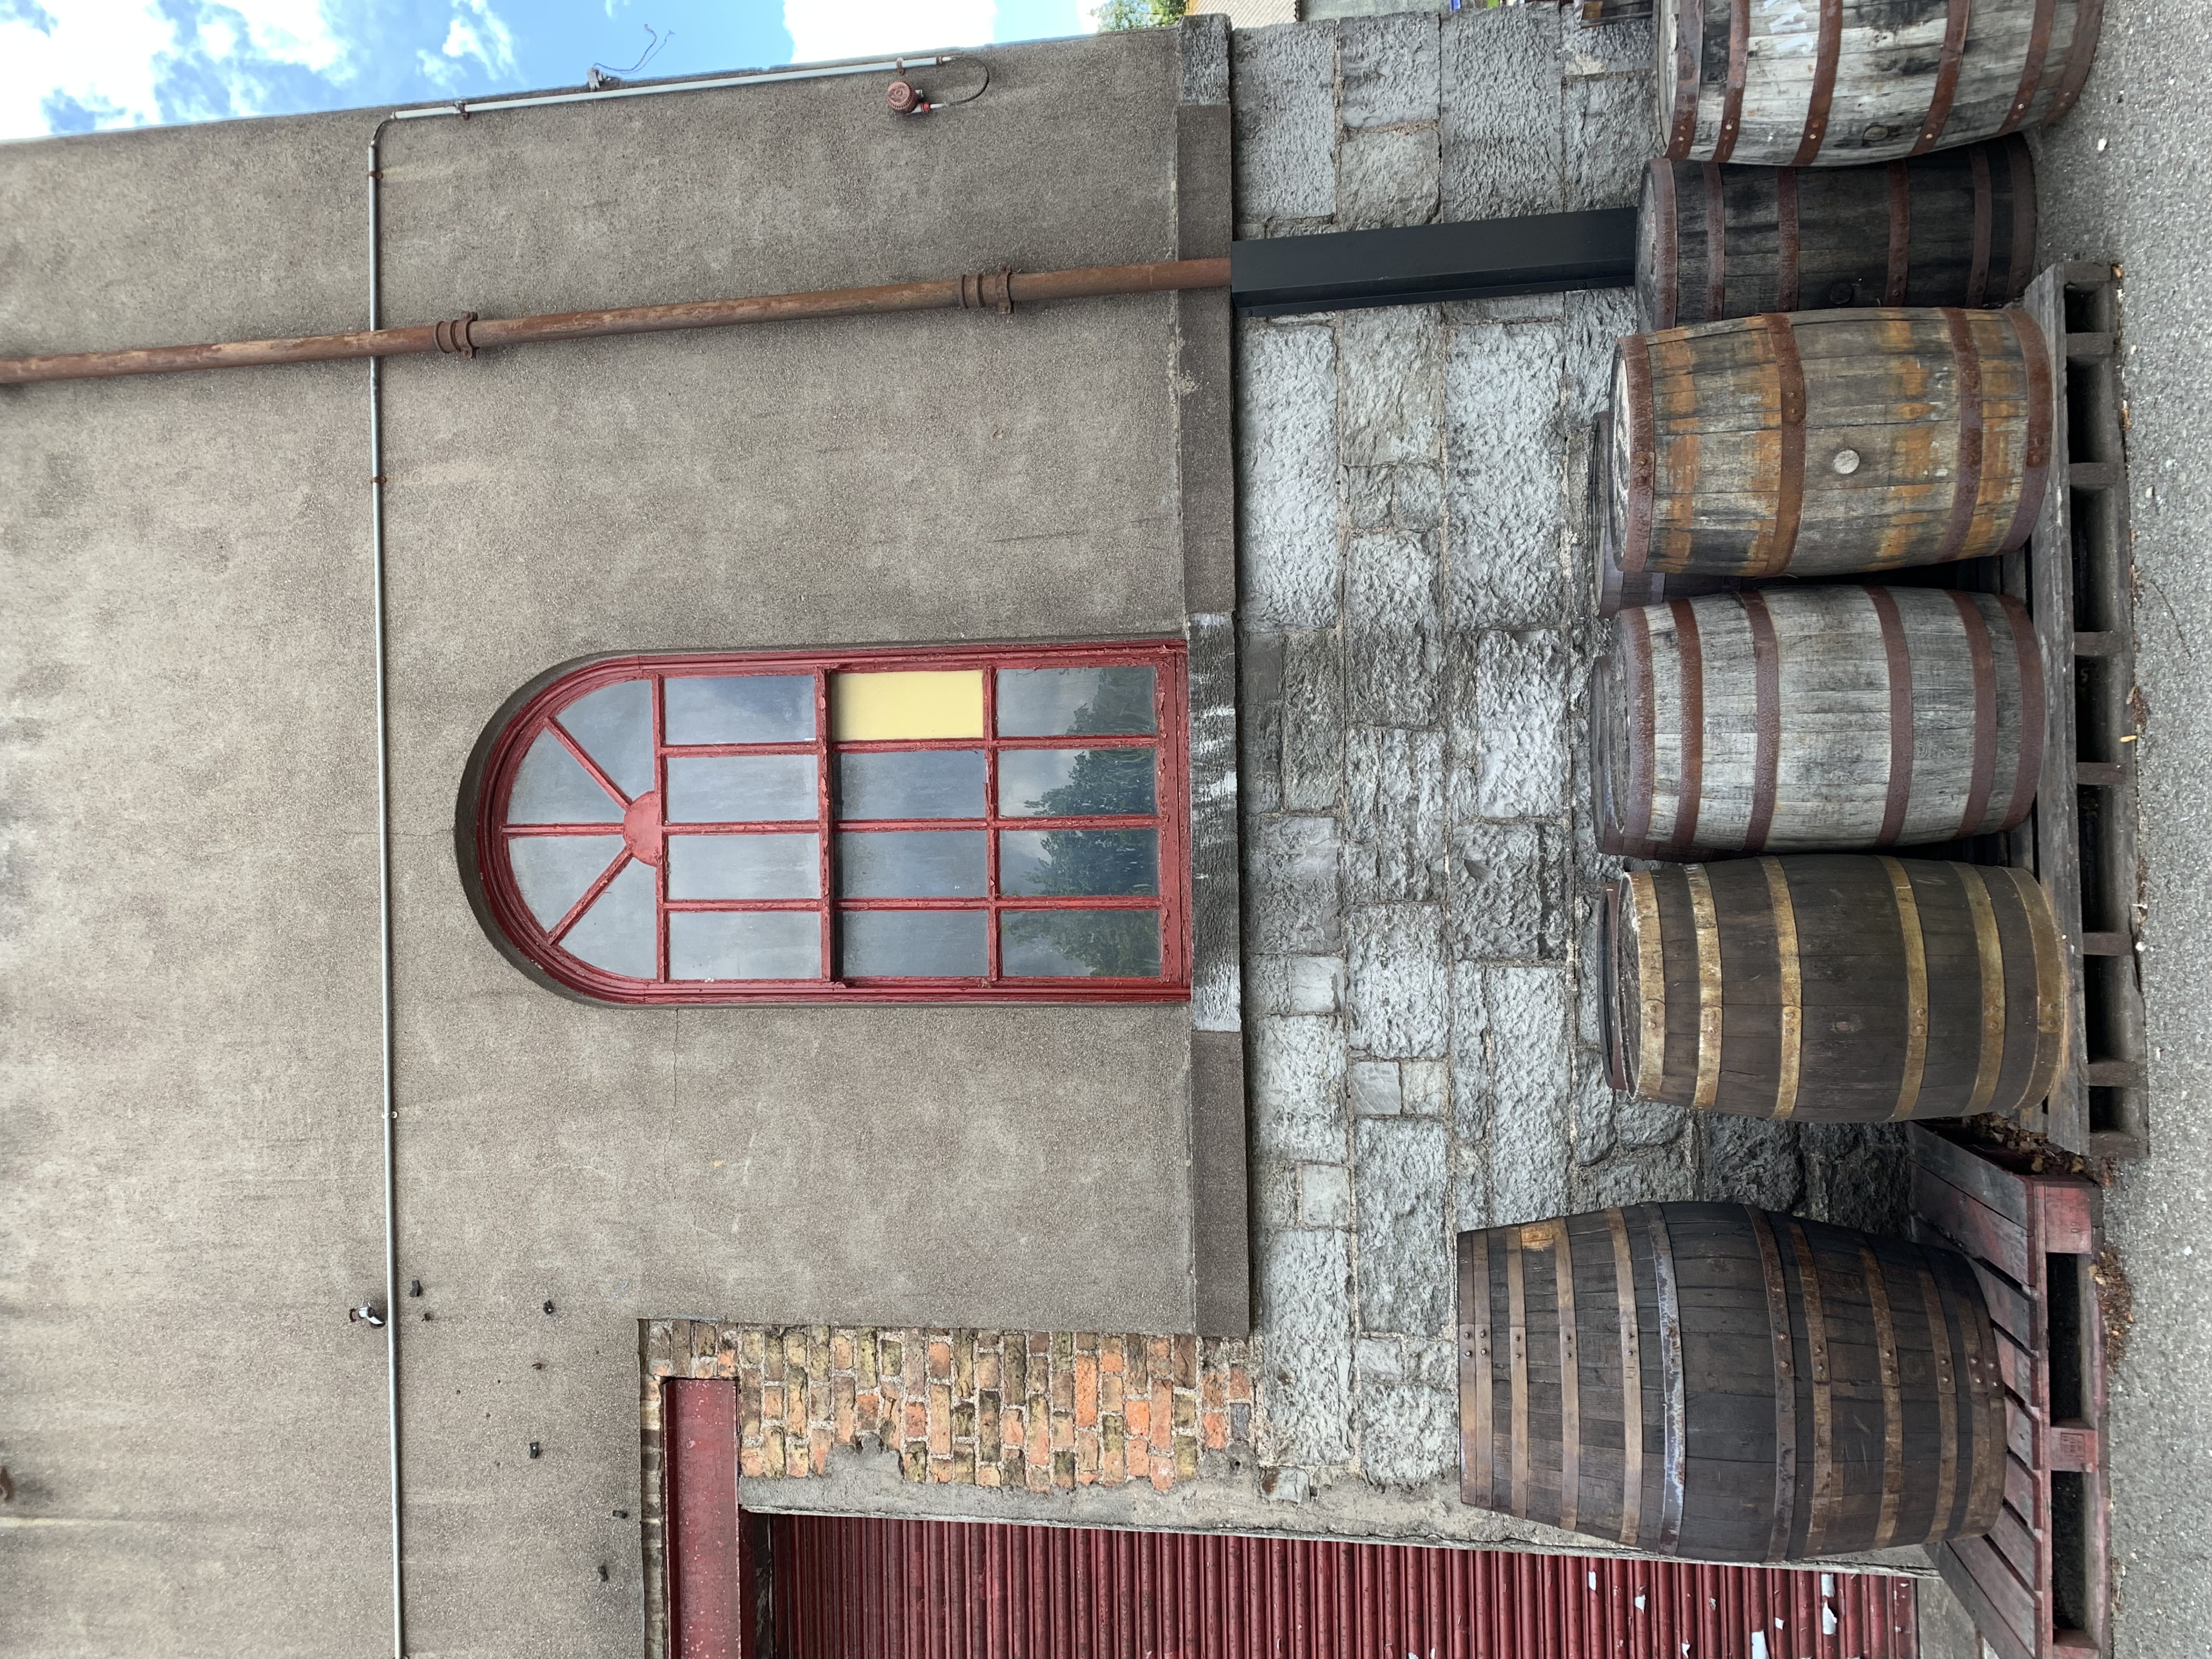 Types of Barrels on pallets next to a building